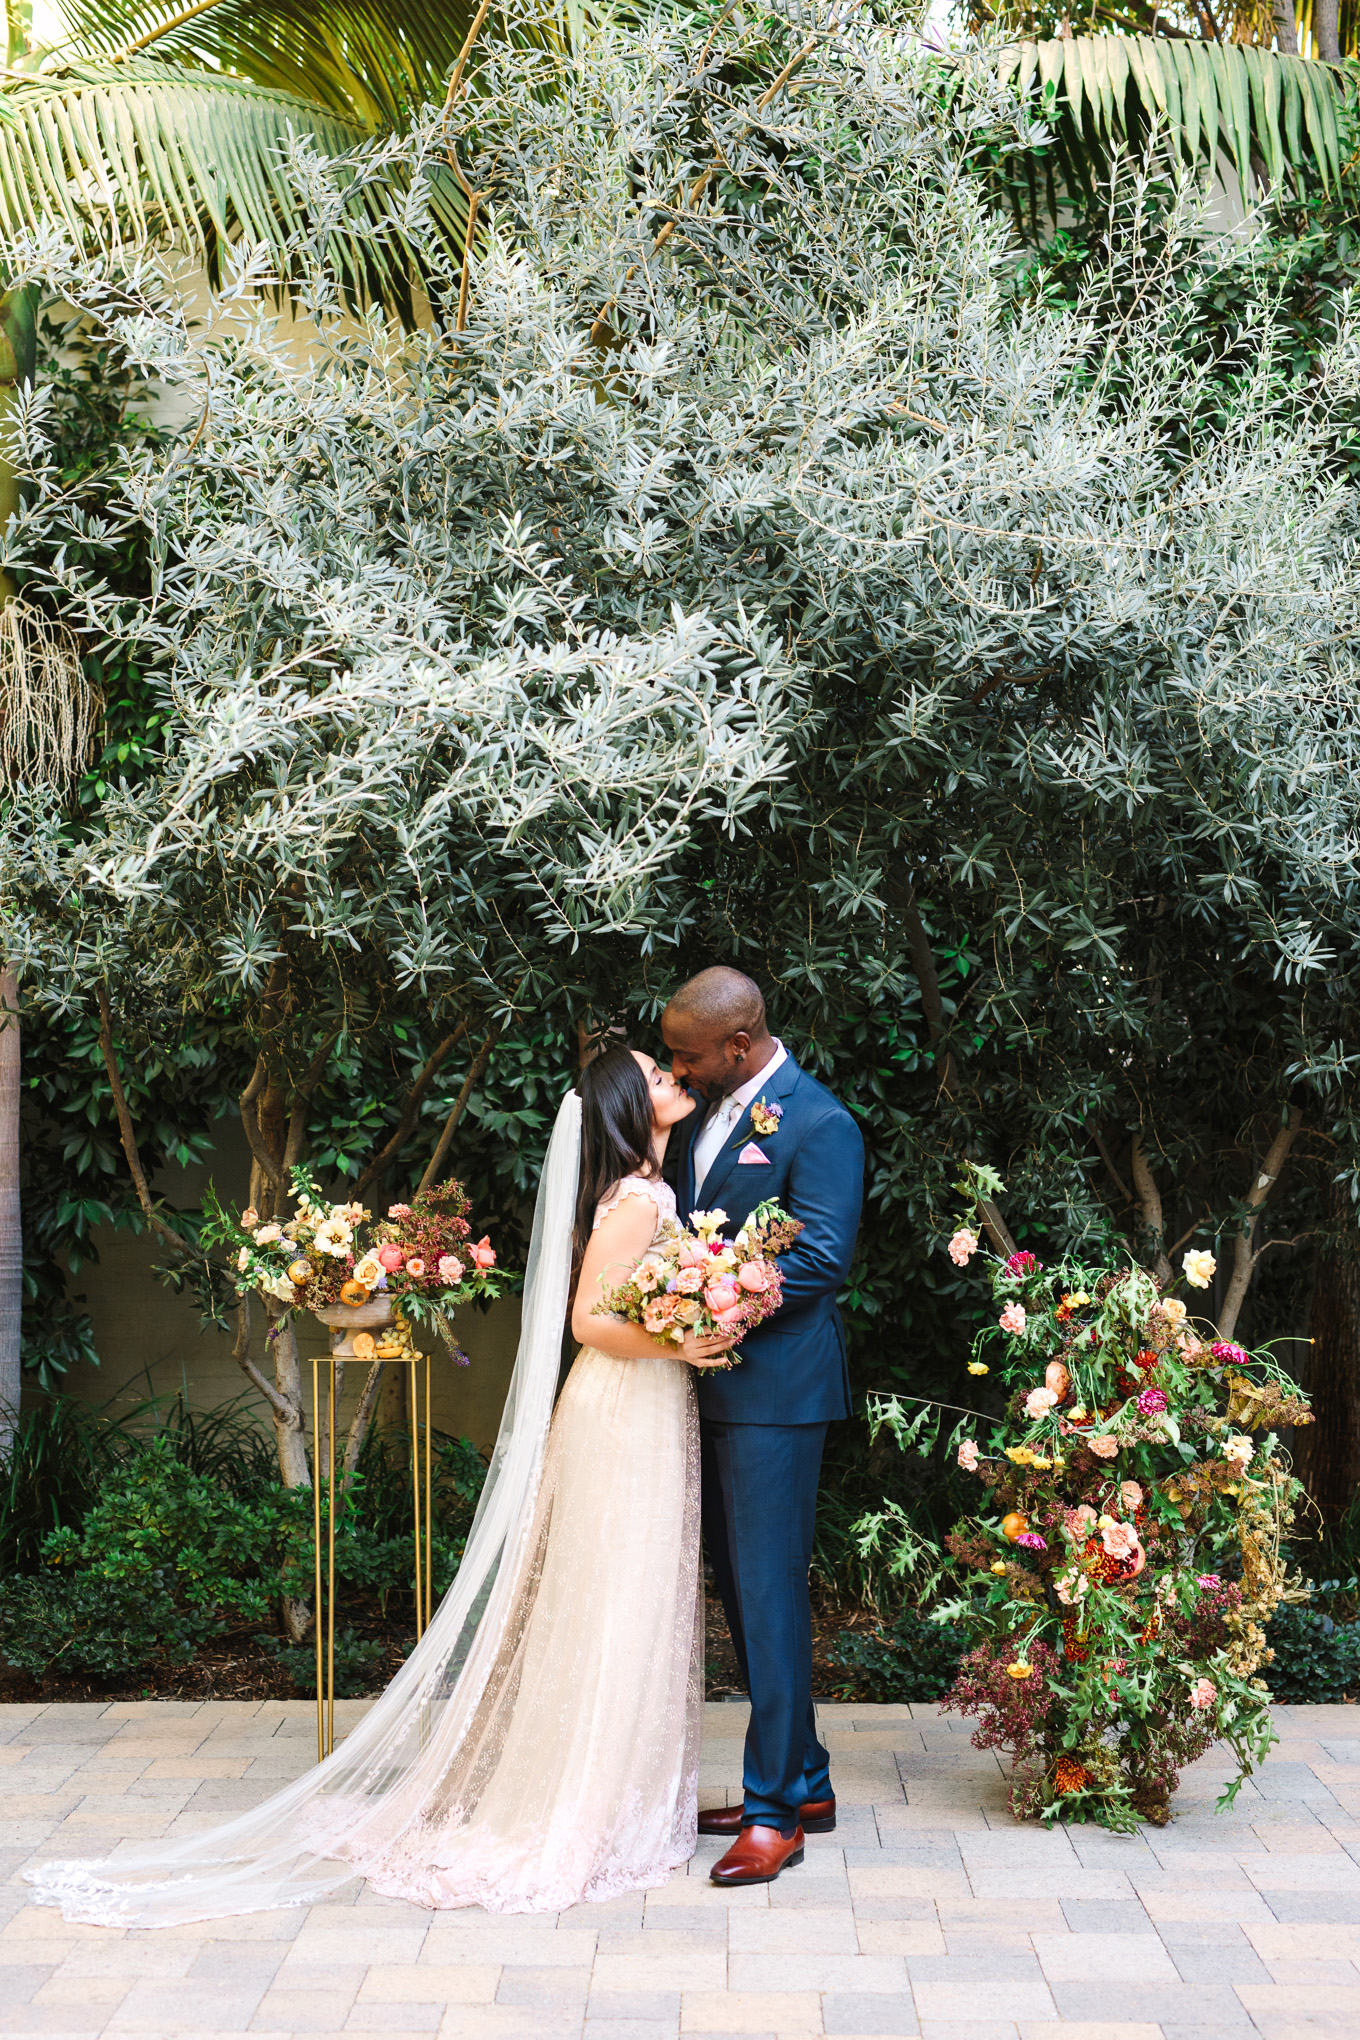 Vibiana DTLA garden wedding ceremony | Best Southern California Garden Wedding Venues | Colorful and elevated wedding photography for fun-loving couples | #gardenvenue #weddingvenue #socalweddingvenue #bouquetideas #uniquebouquet   Source: Mary Costa Photography | Los Angeles 